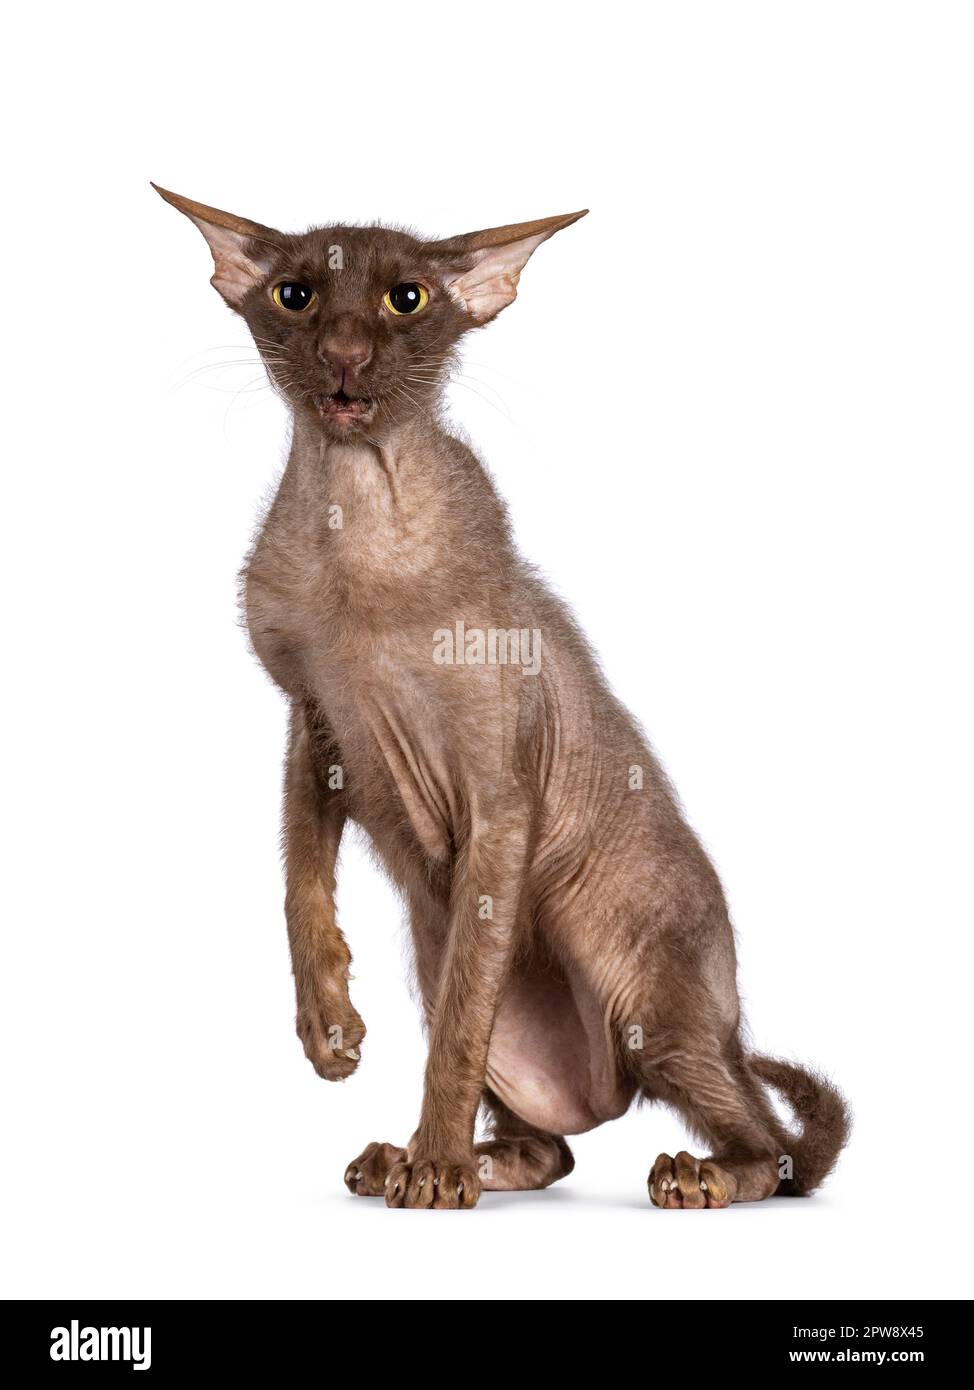 Brown senior Peterbald Brush cat, sitting up side ways. Looking silly with ears in airplane mode to camera. Isolated on a white background. Stock Photo